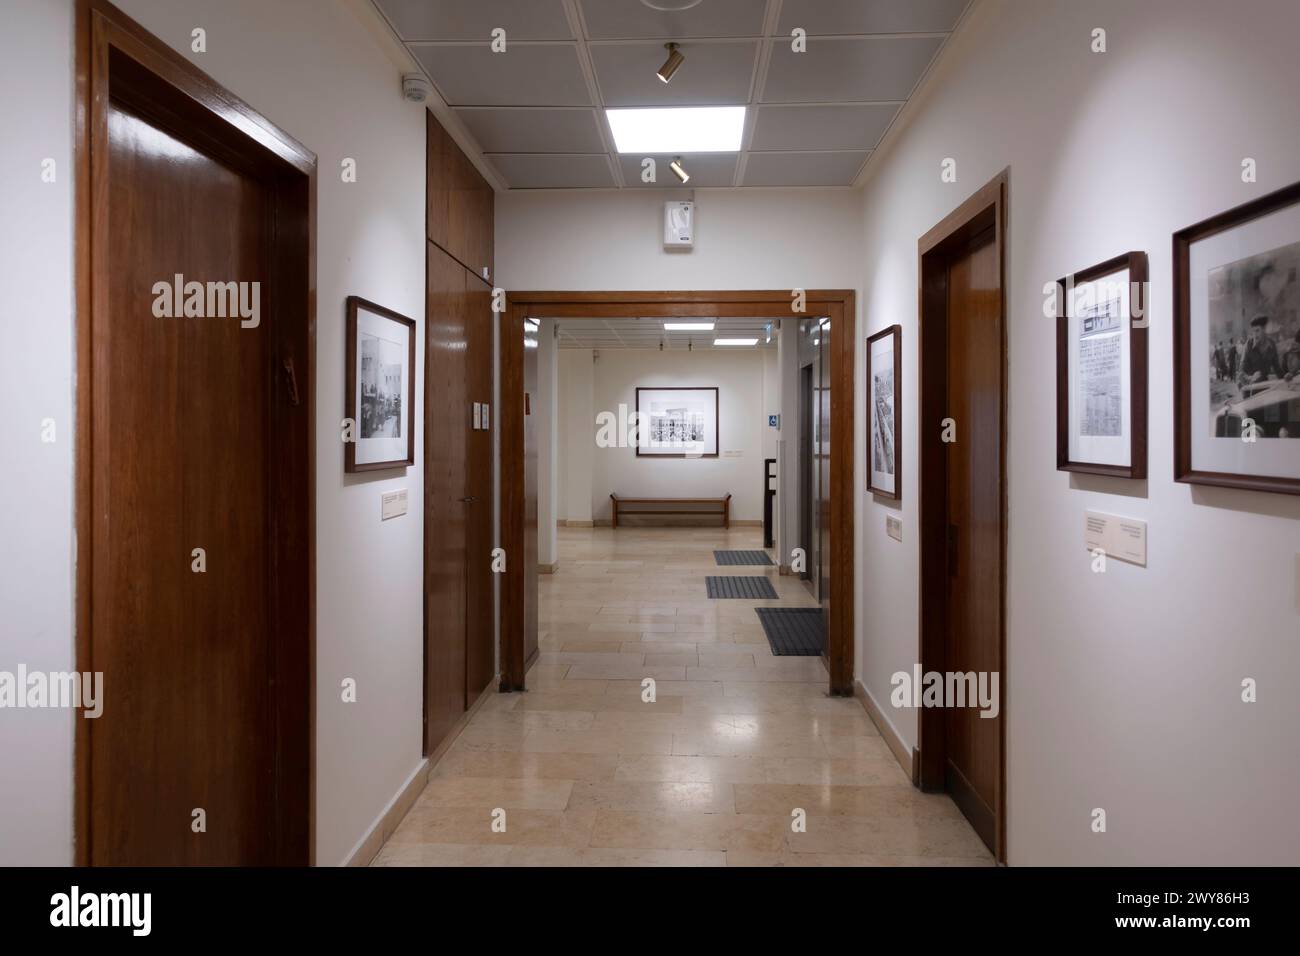 A corridor at the Jewish Agency for Israel which is the largest Jewish nonprofit organization responsible for the immigration and absorption of Jews and their families from the Diaspora into Israel. Located in Rehavia also Rechavia neighborhood in West Jerusalem Israel Stock Photo